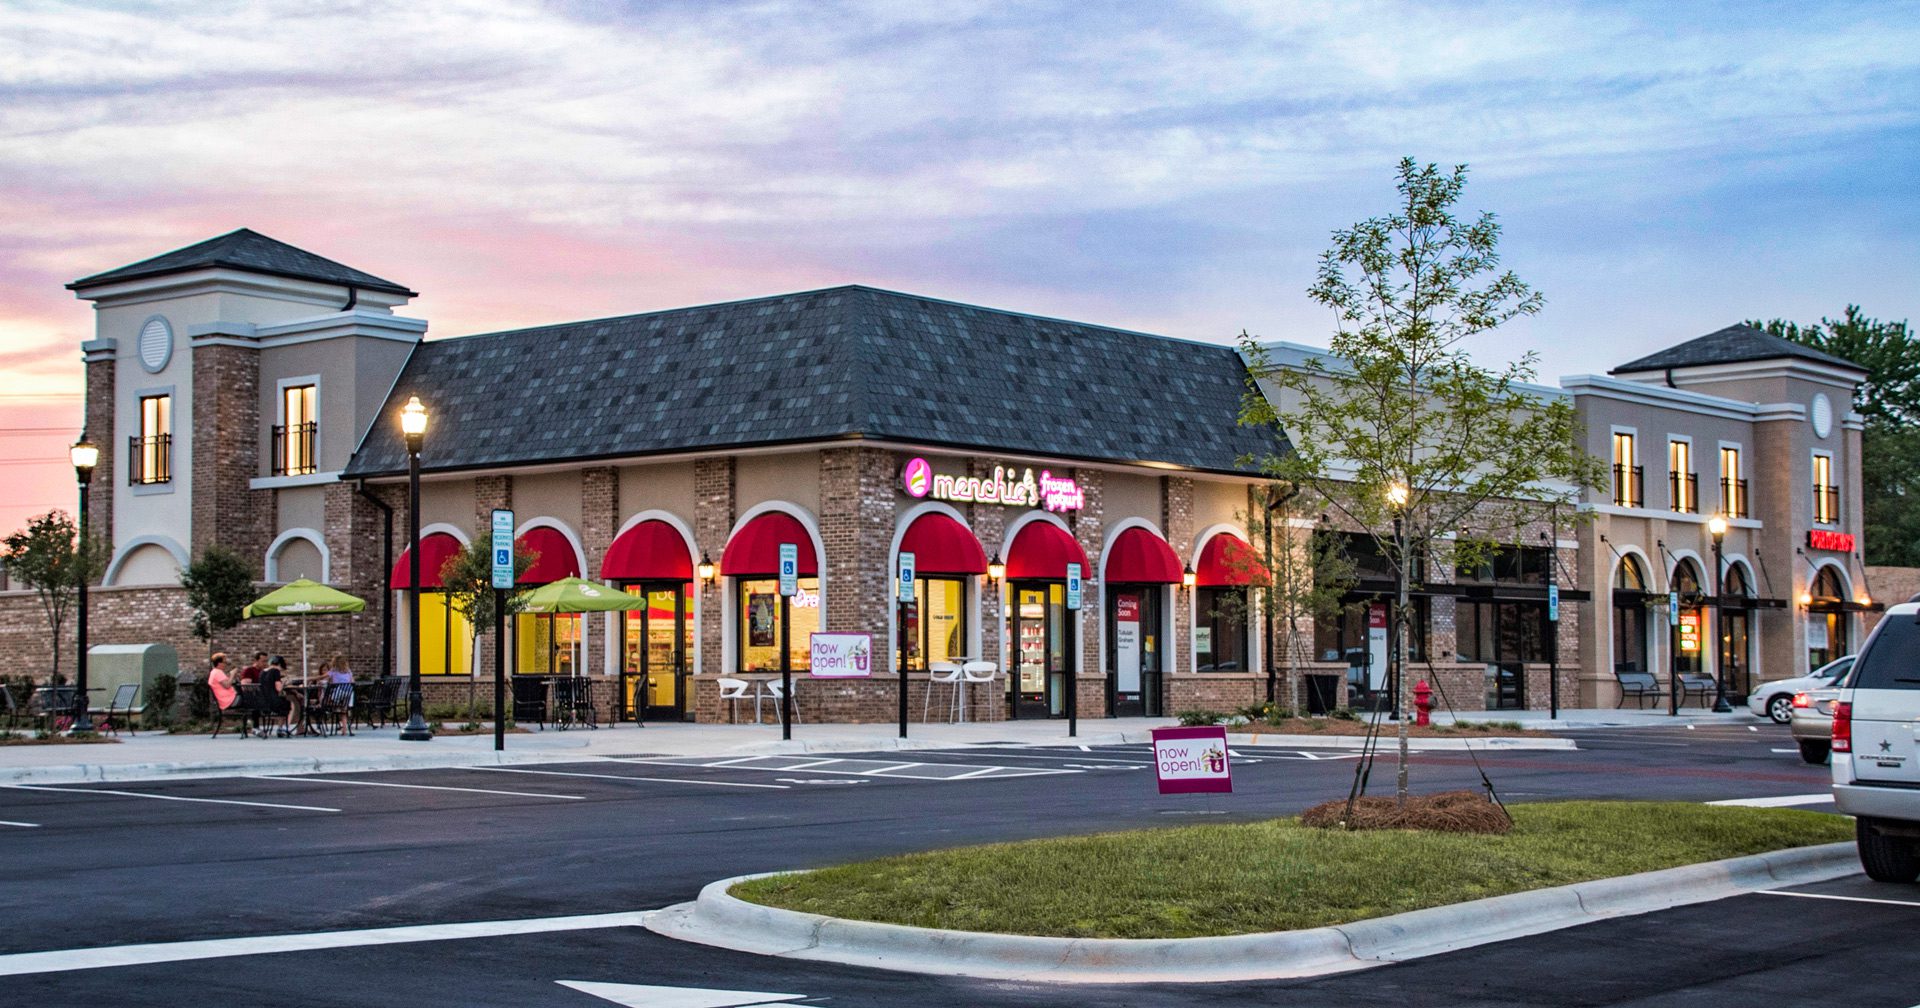 RedStone Menchie's and shops exterior at daytime